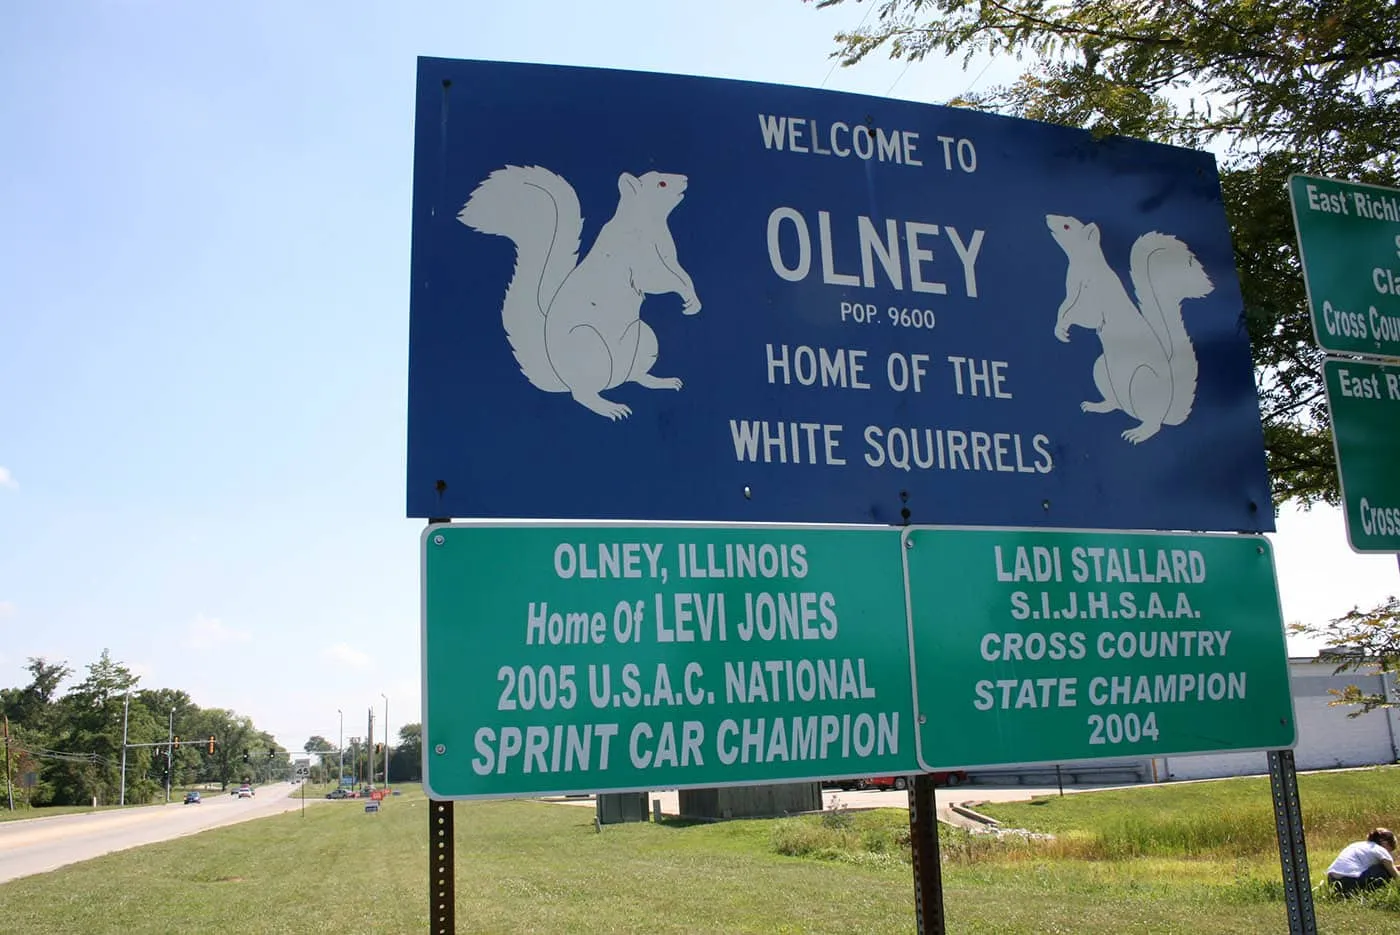 Olney, Illinois: Home of the White Squirrels